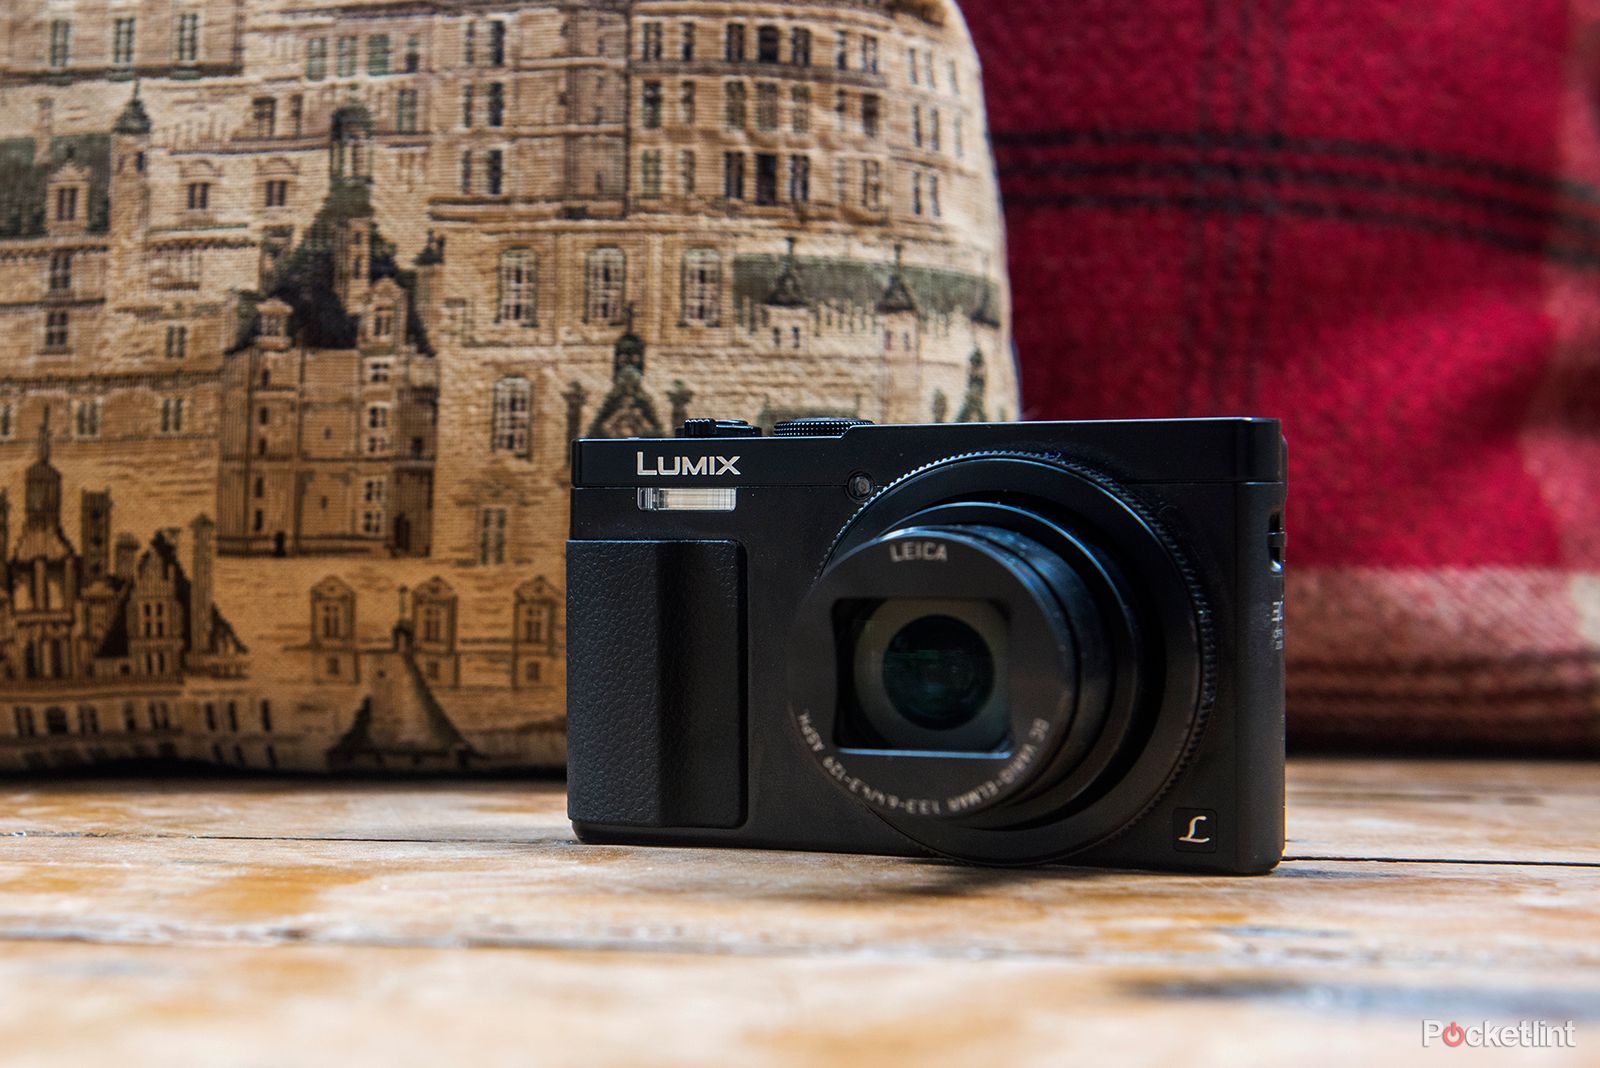 Panasonic Lumix TZ70 review: The do-it-all compact camera to beat